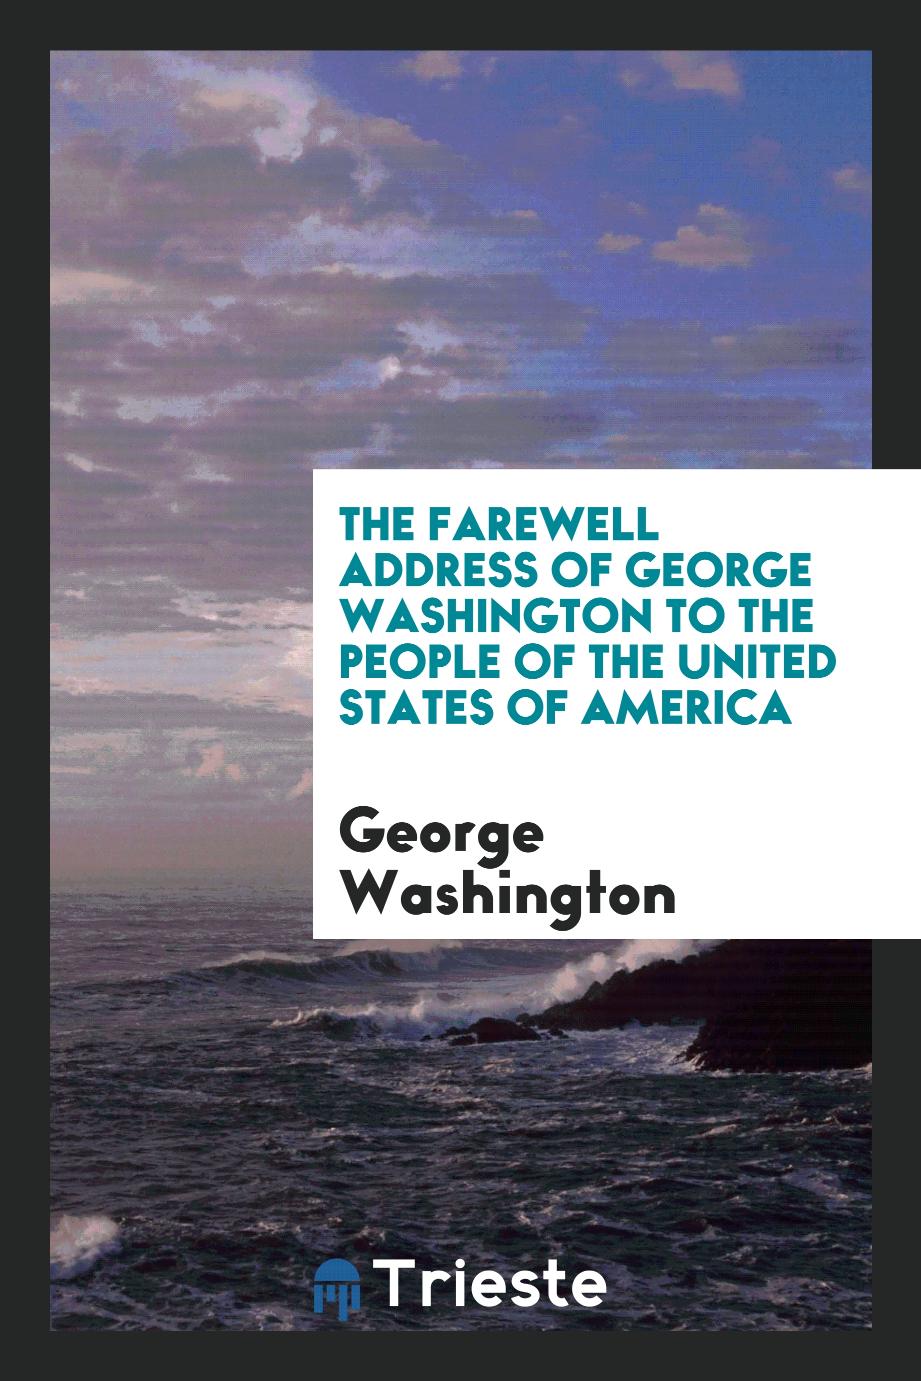 The Farewell Address of George Washington to the People of the United States of America